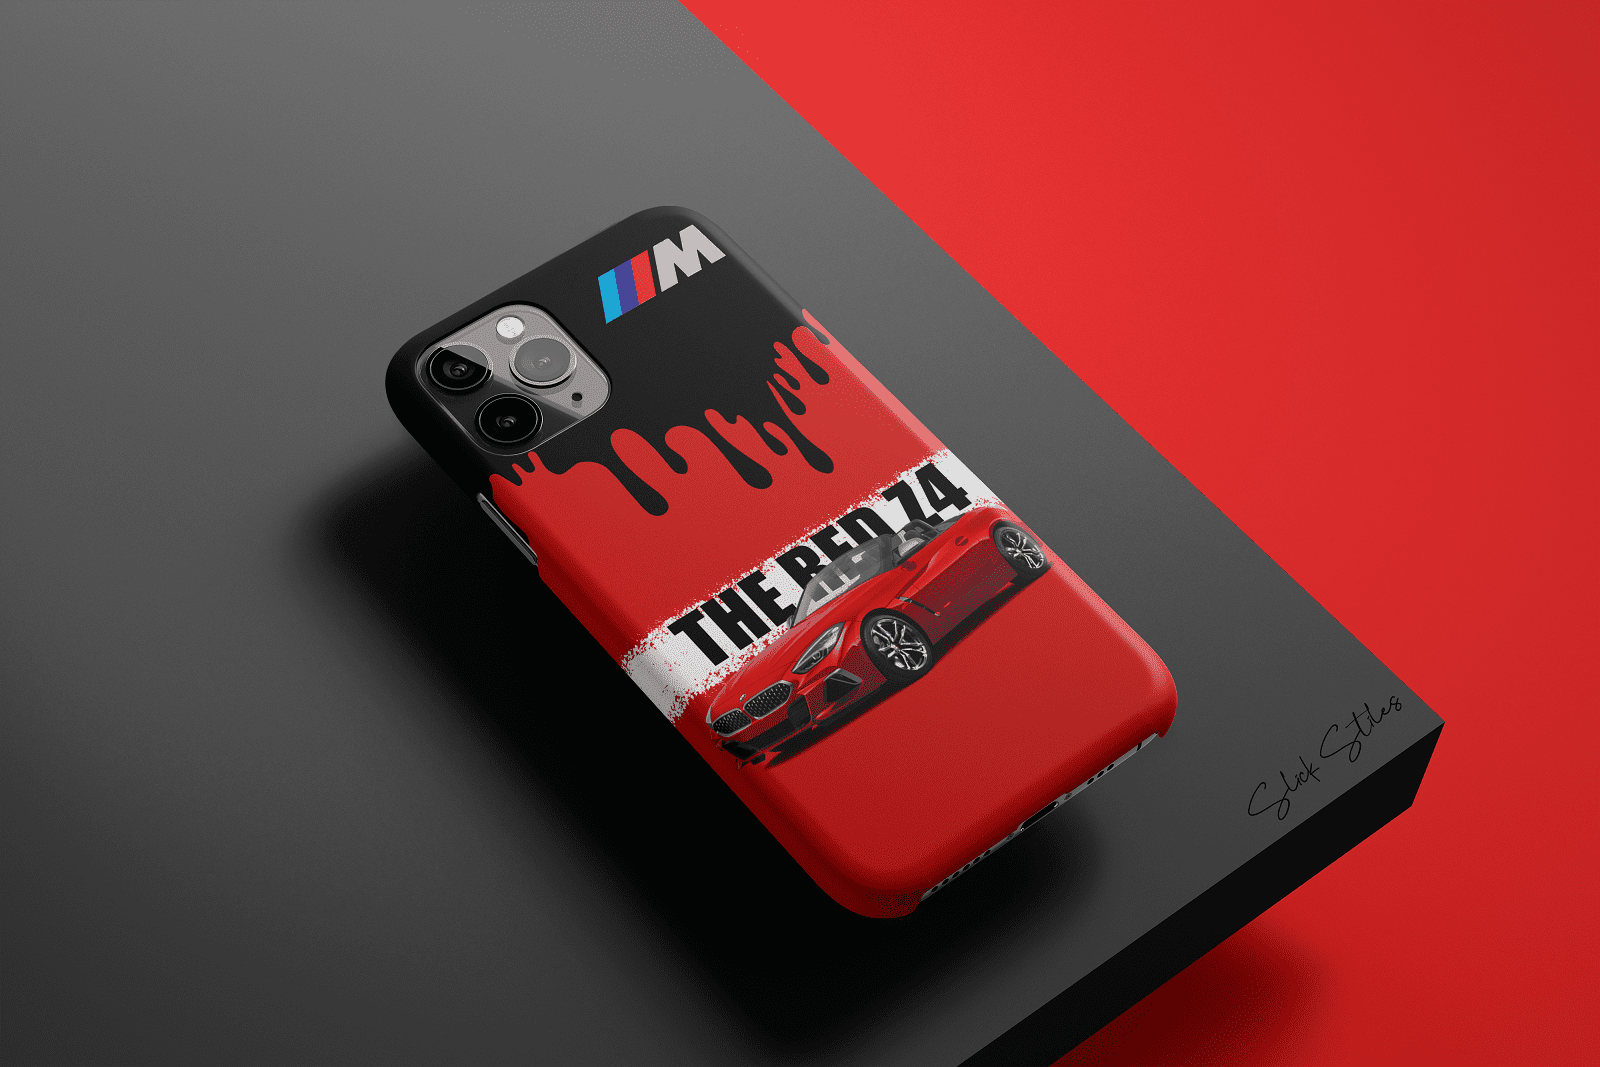 The Red Z4 Phone Case